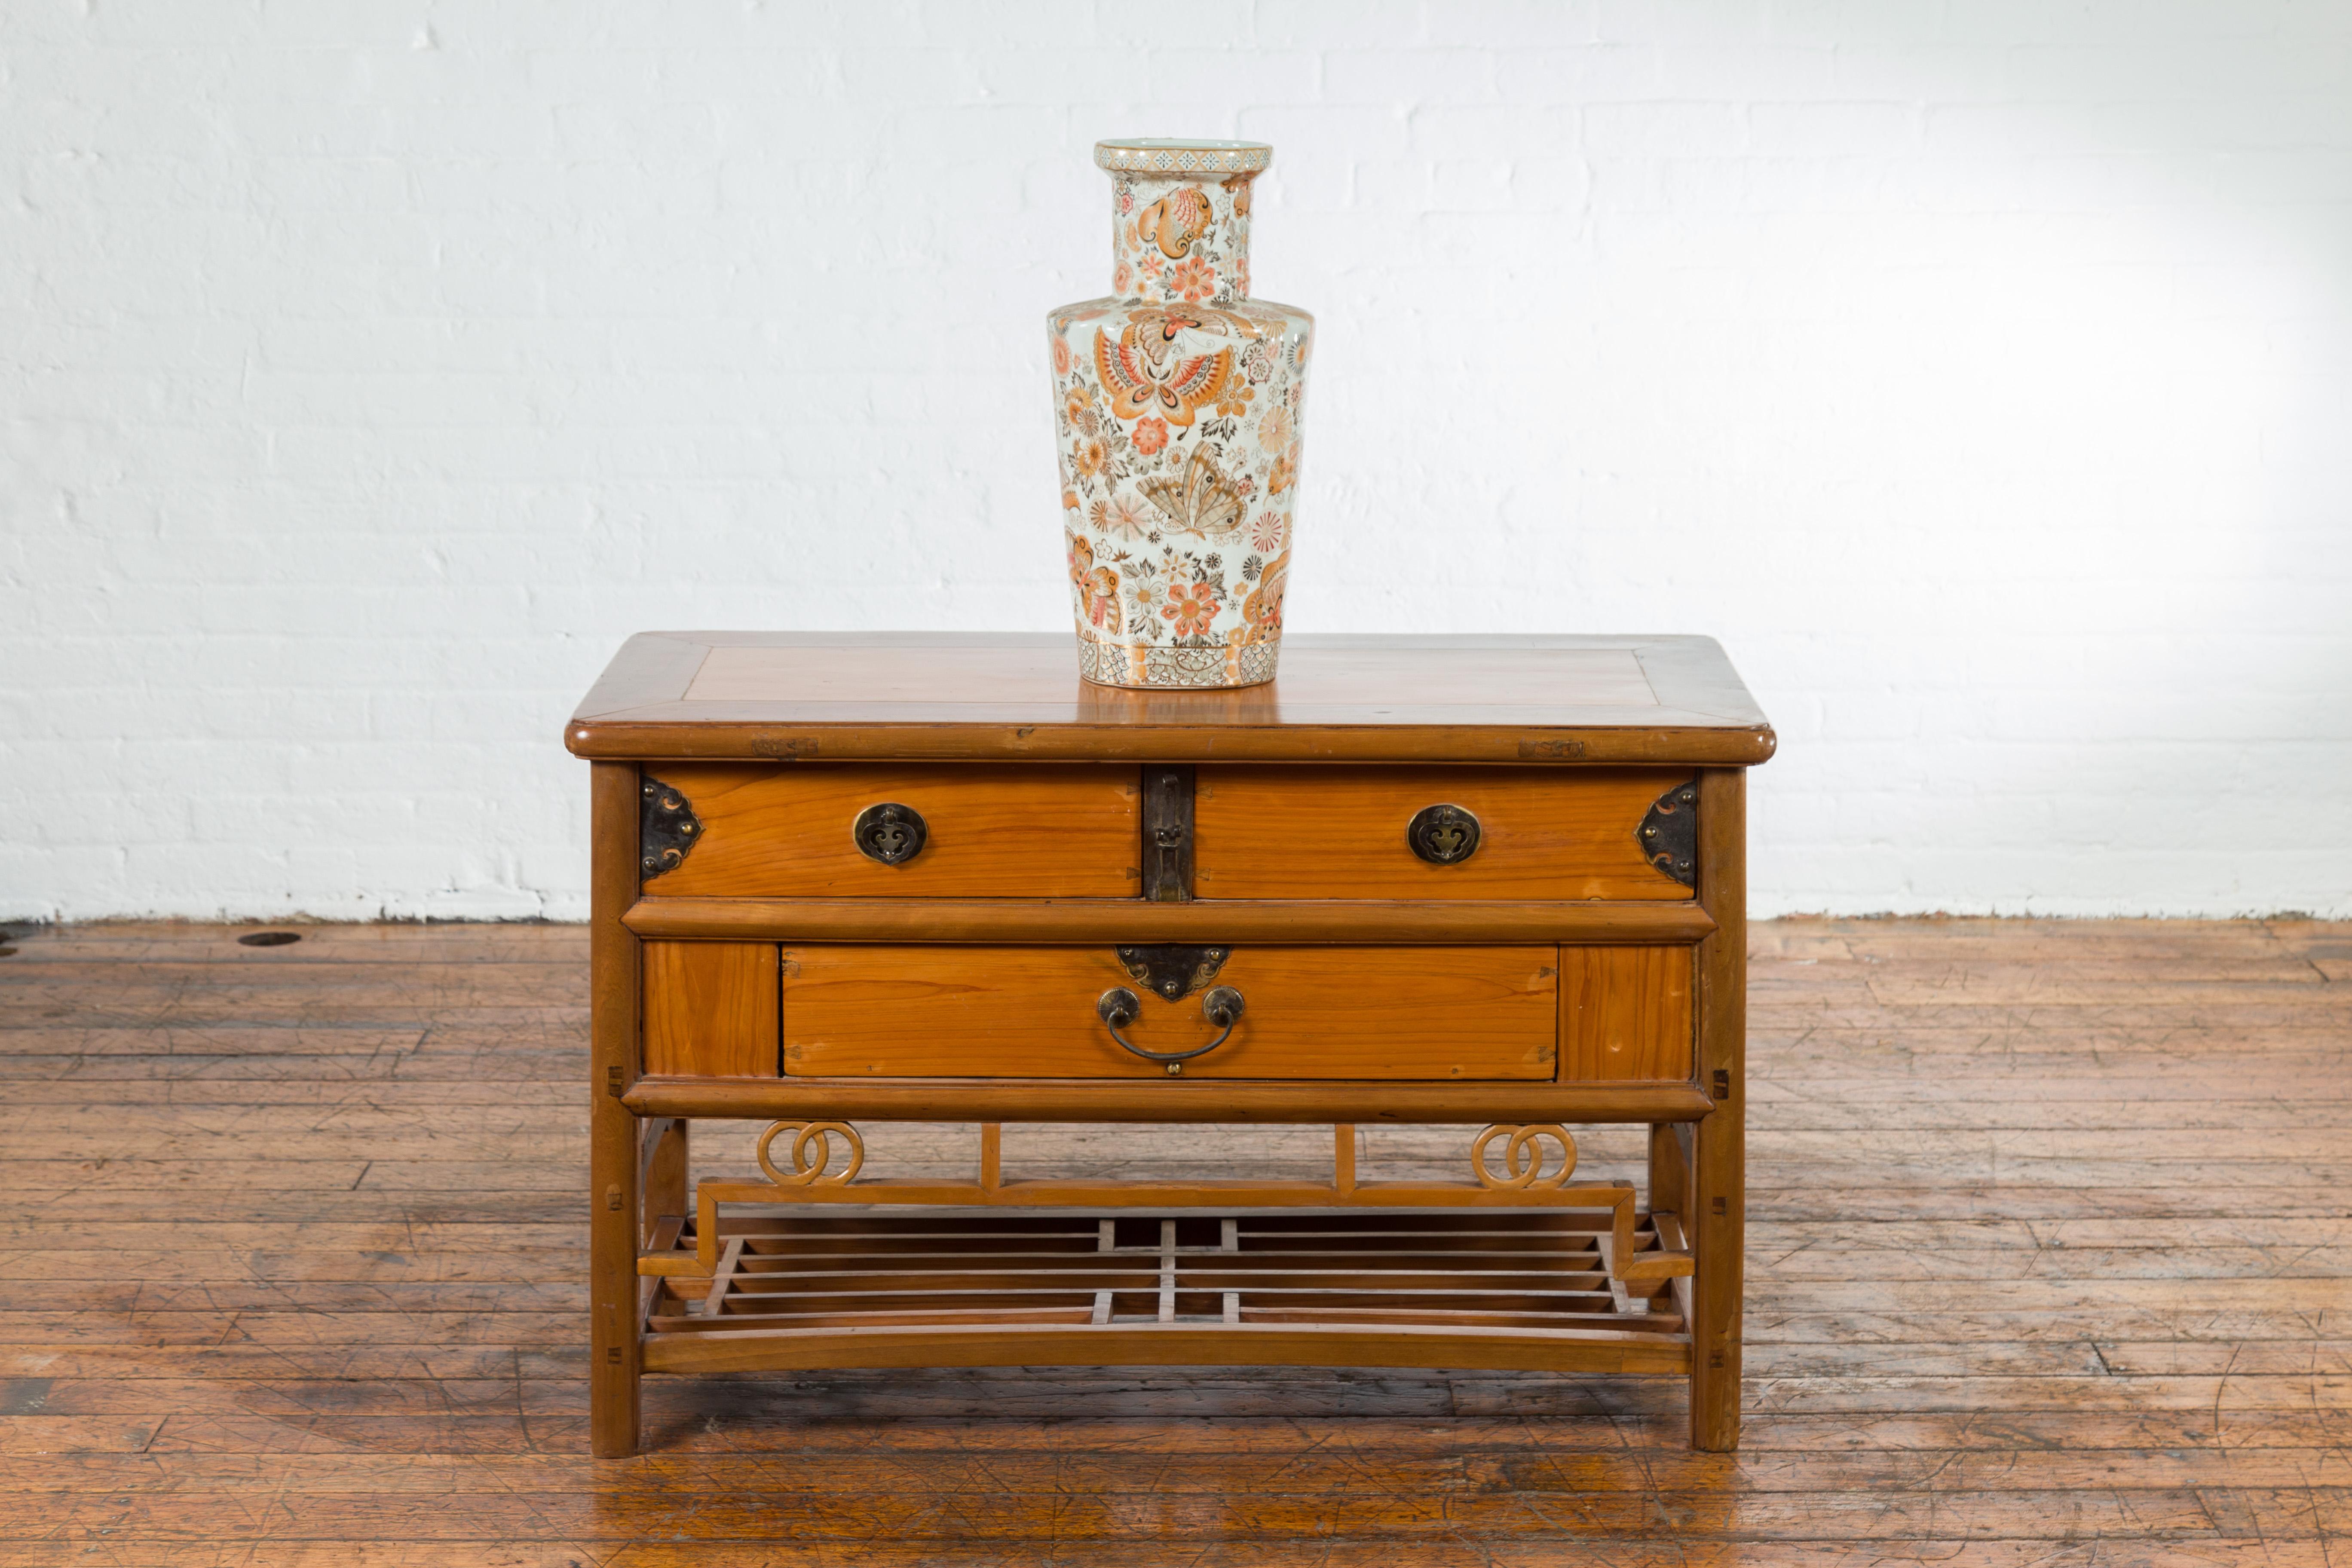 A Chinese sideboard from the early 20th century, with natural finish, three drawers and brass hardware. Created in China during the early years of the 20th century, this sideboard features a rectangular top with rounded edges, sitting above three